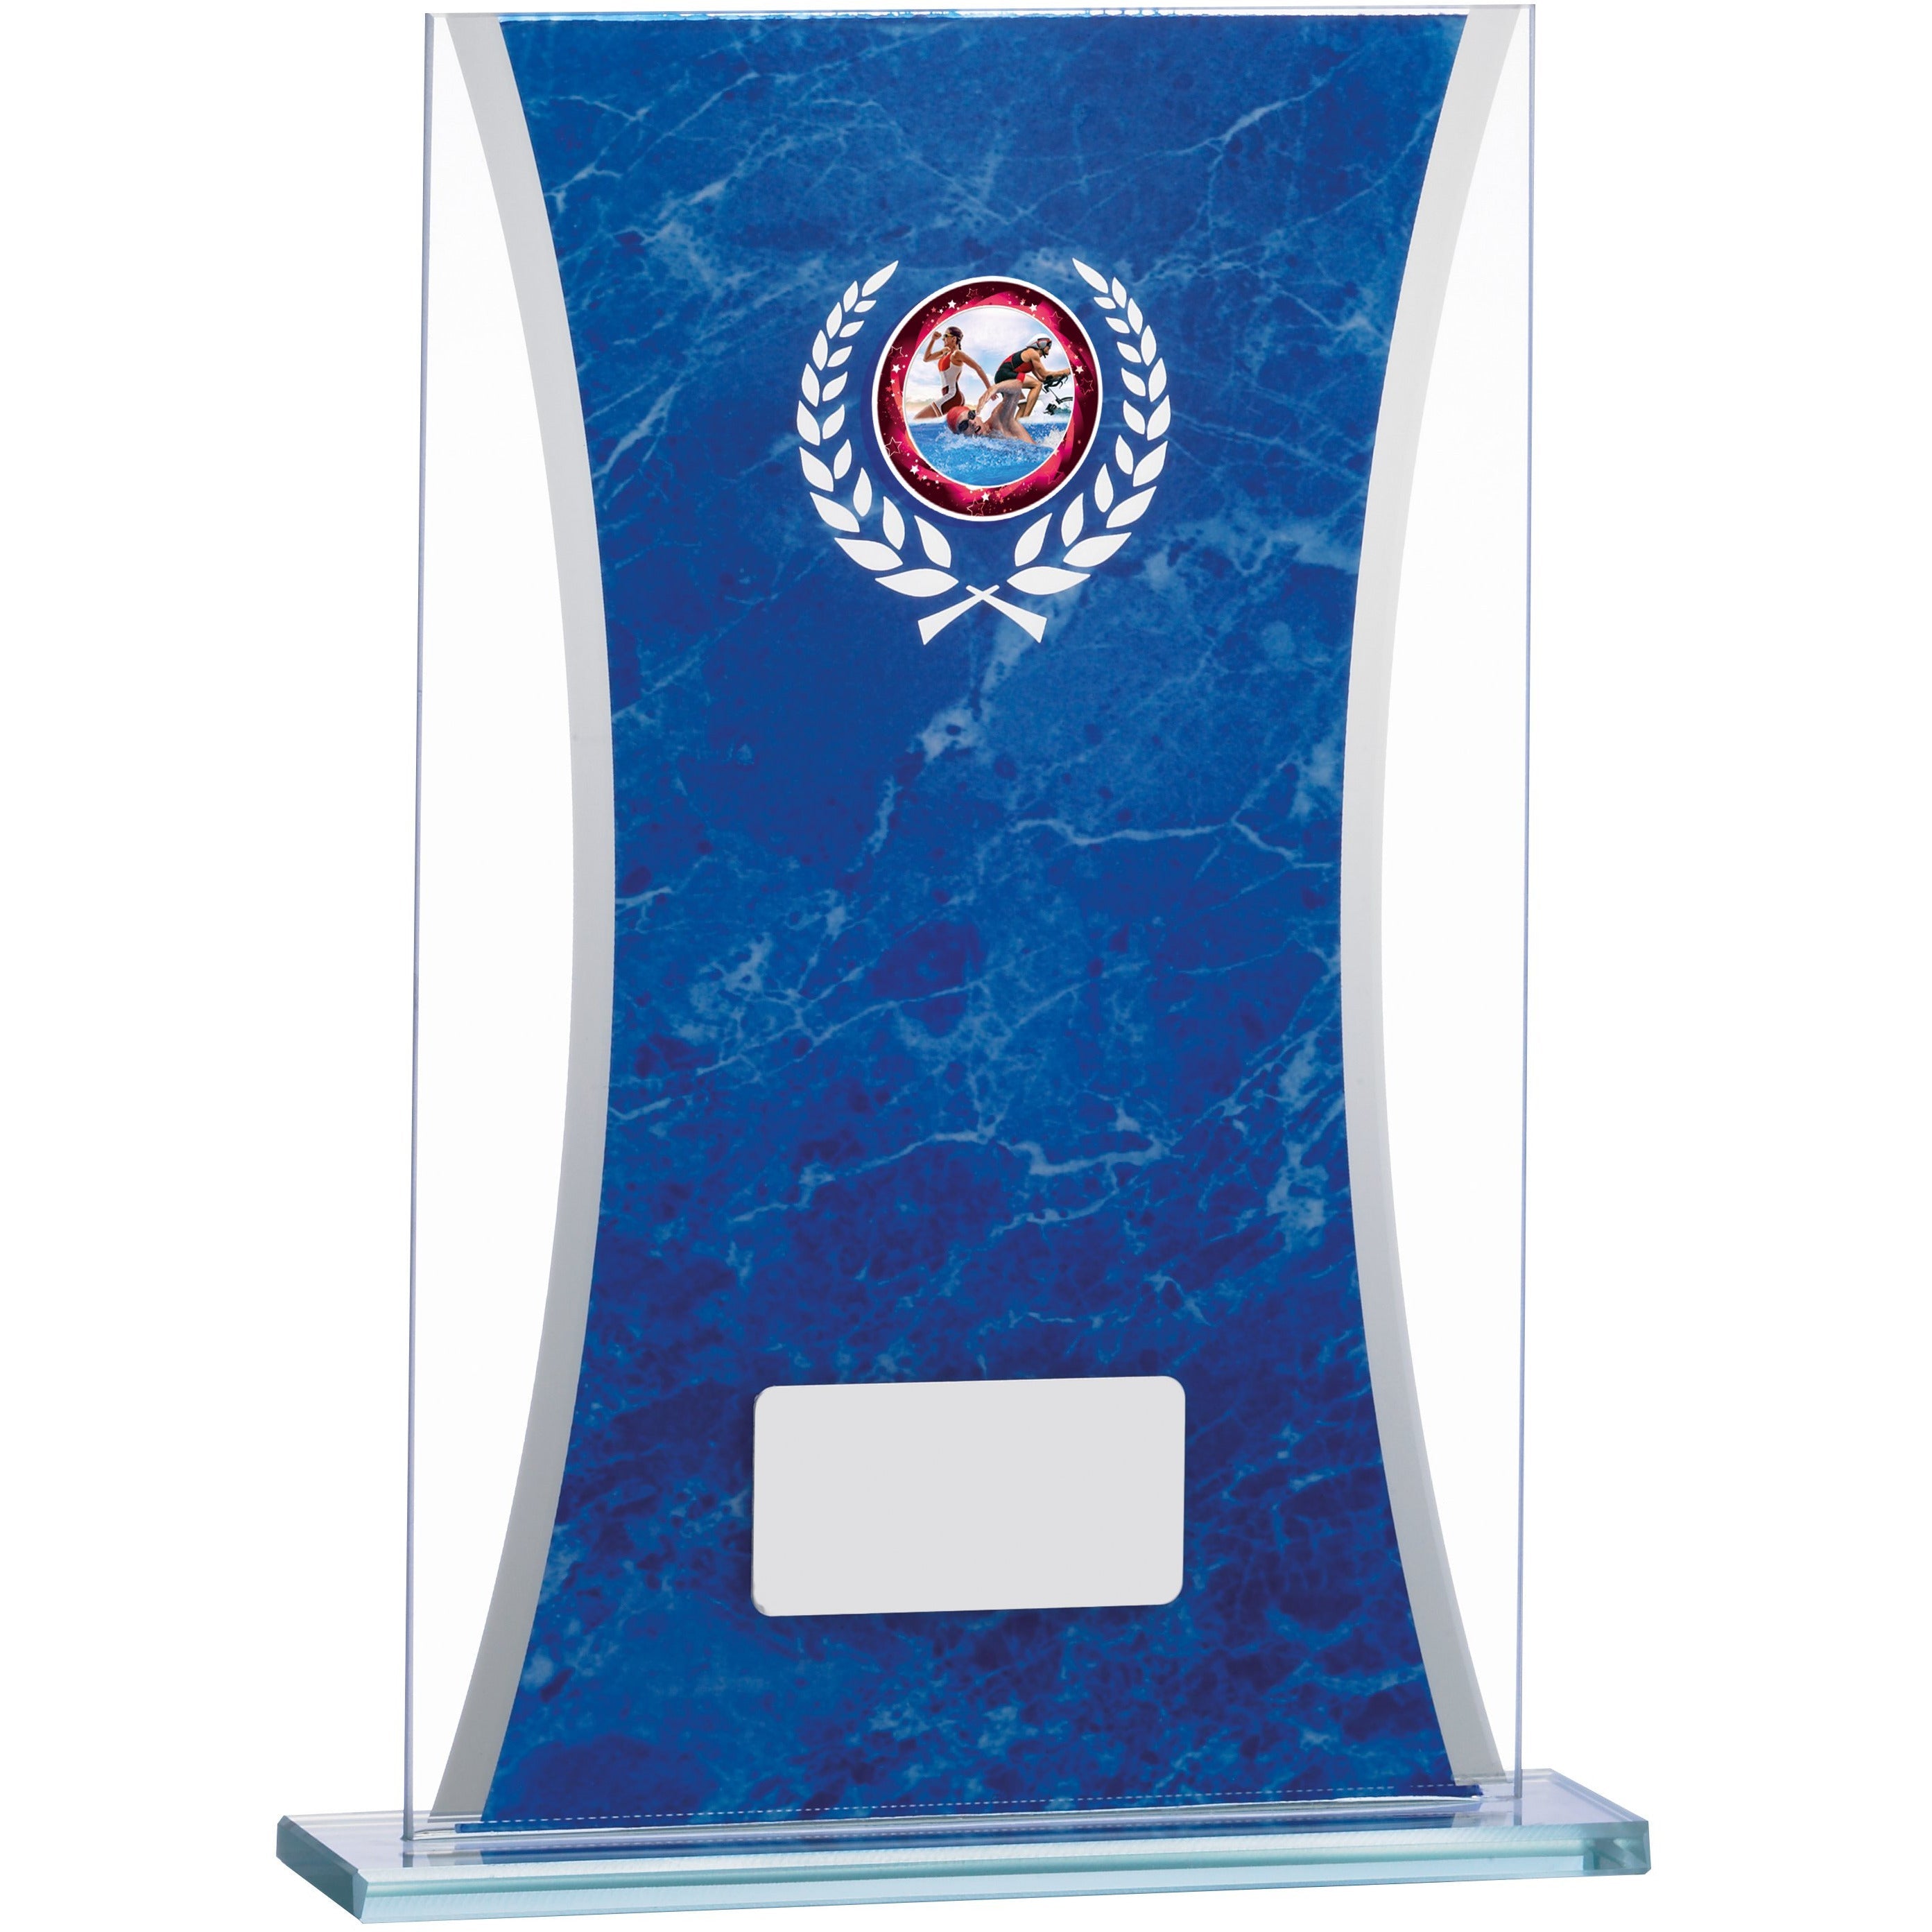 Blue Marble Mirrored Glass Award